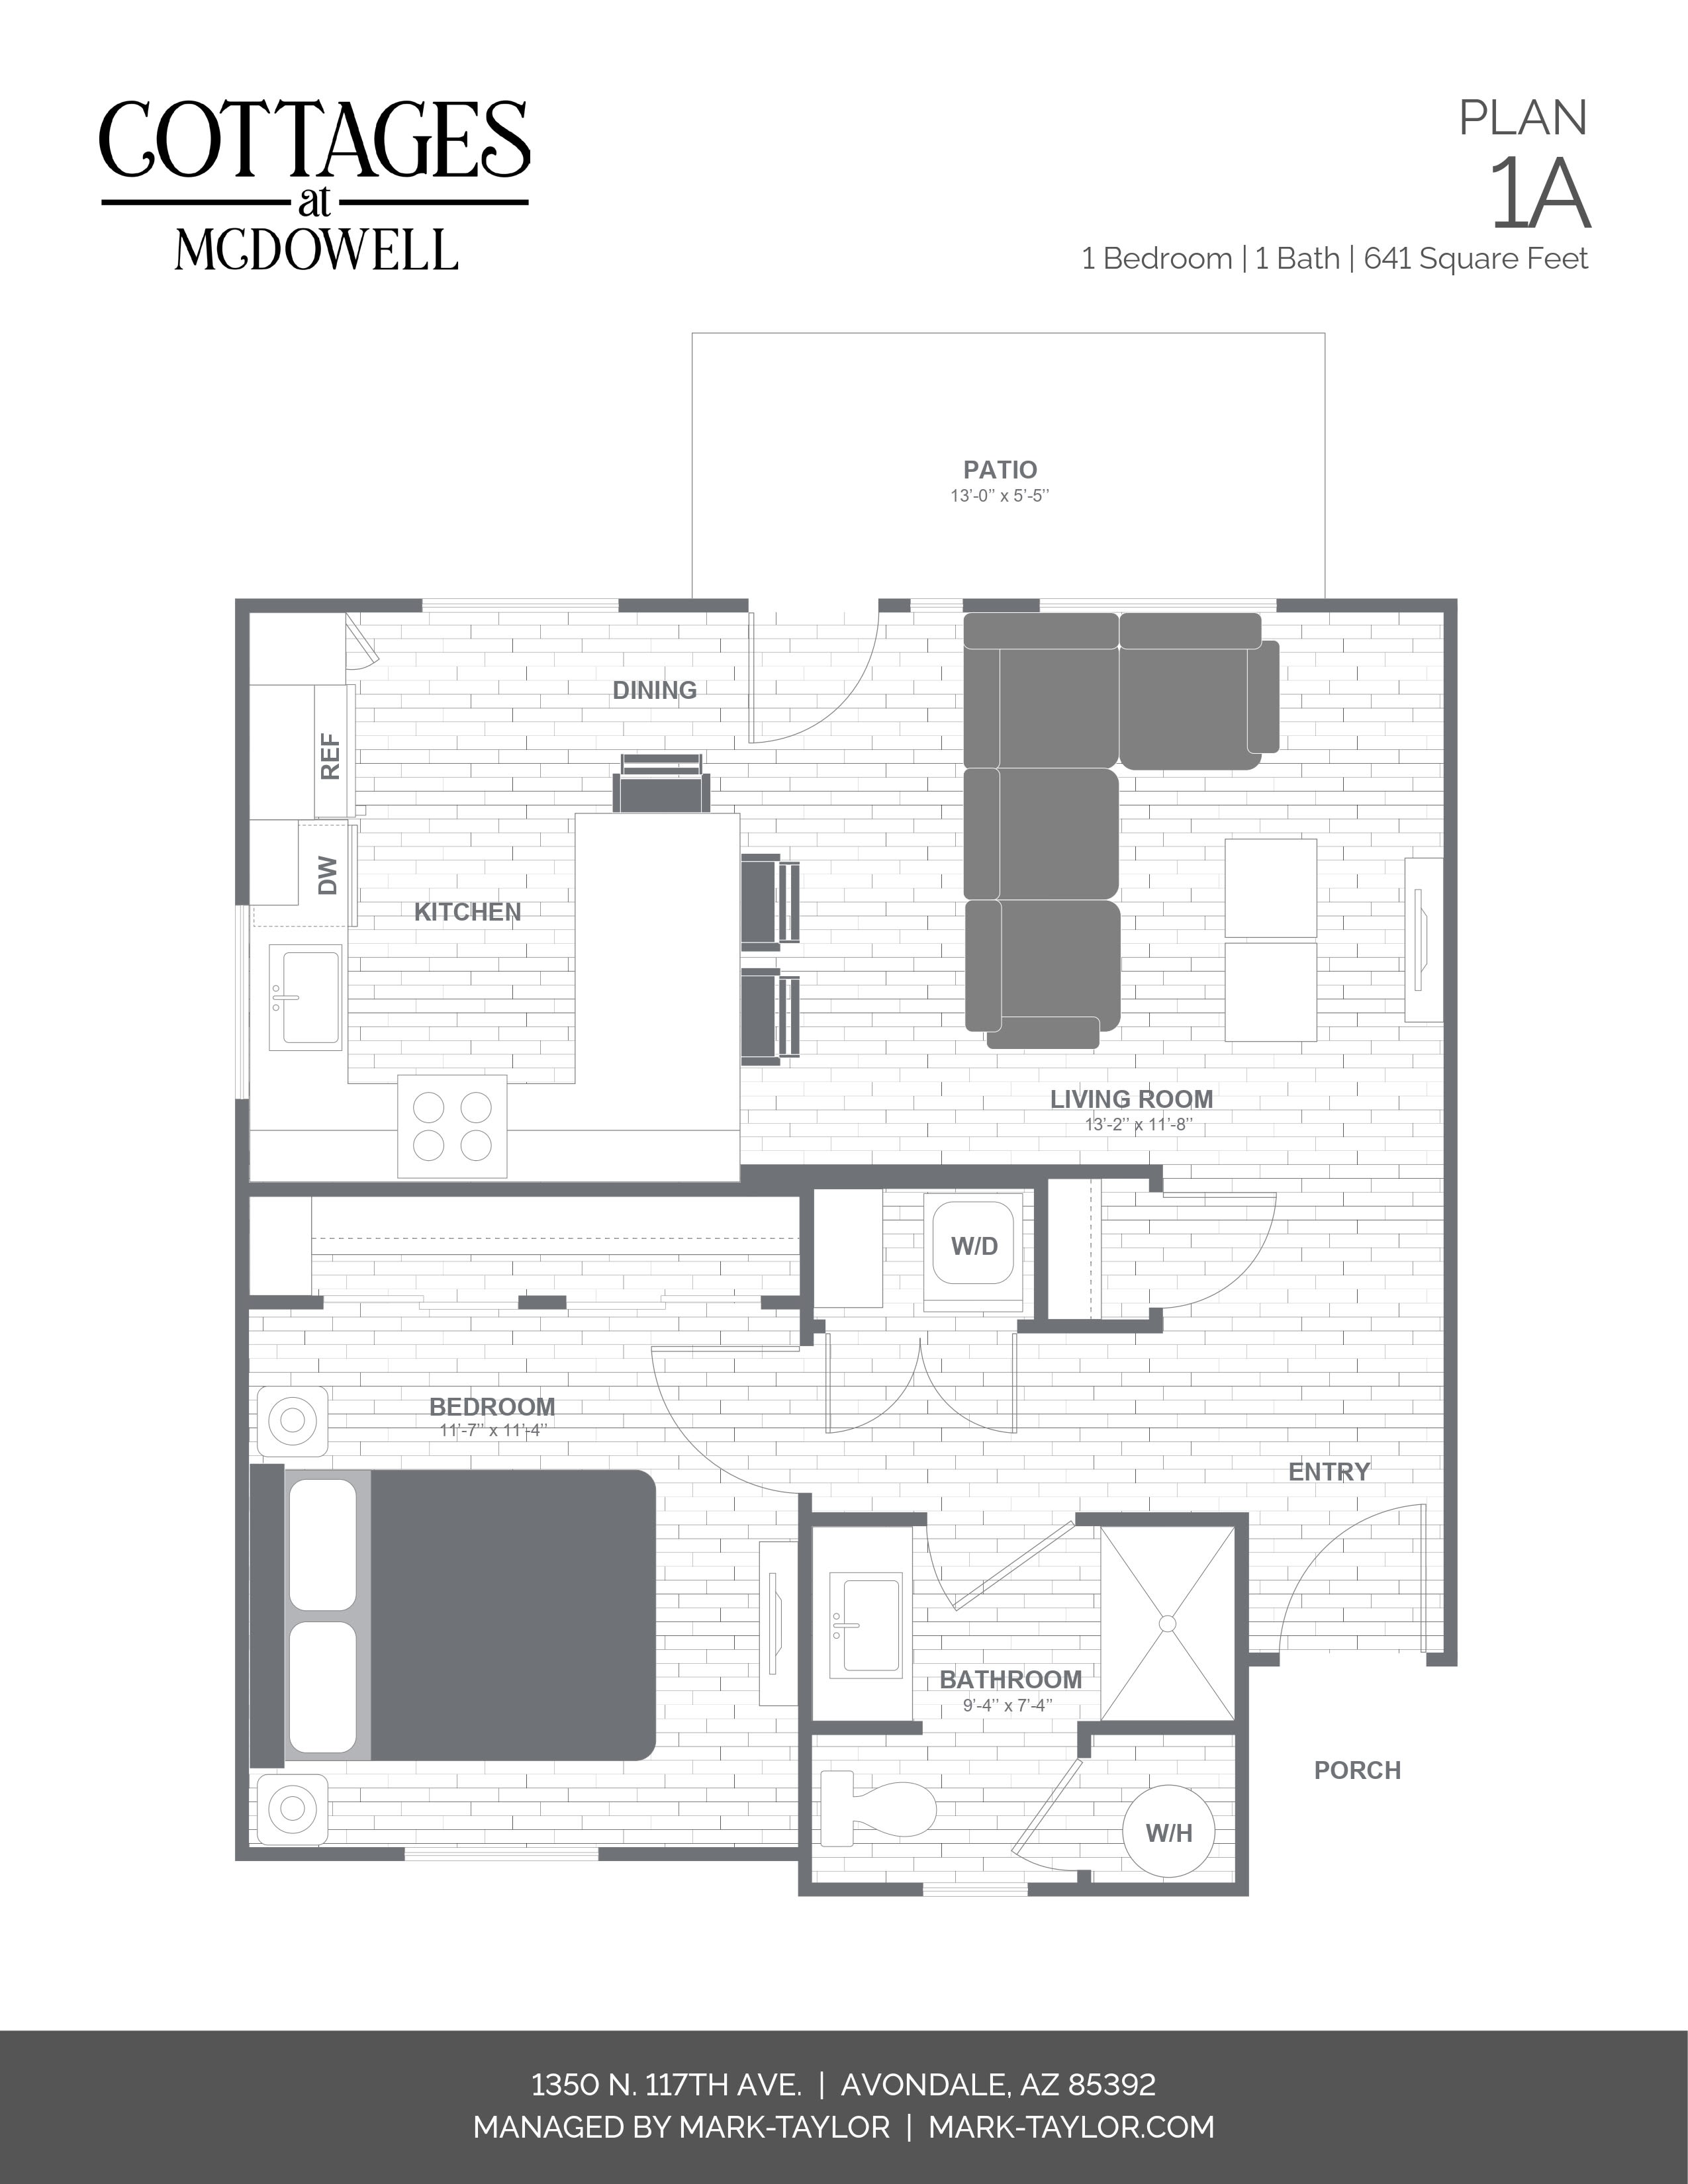 2D studio floor plan image at Cottages at McDowell in Avondale, Arizona